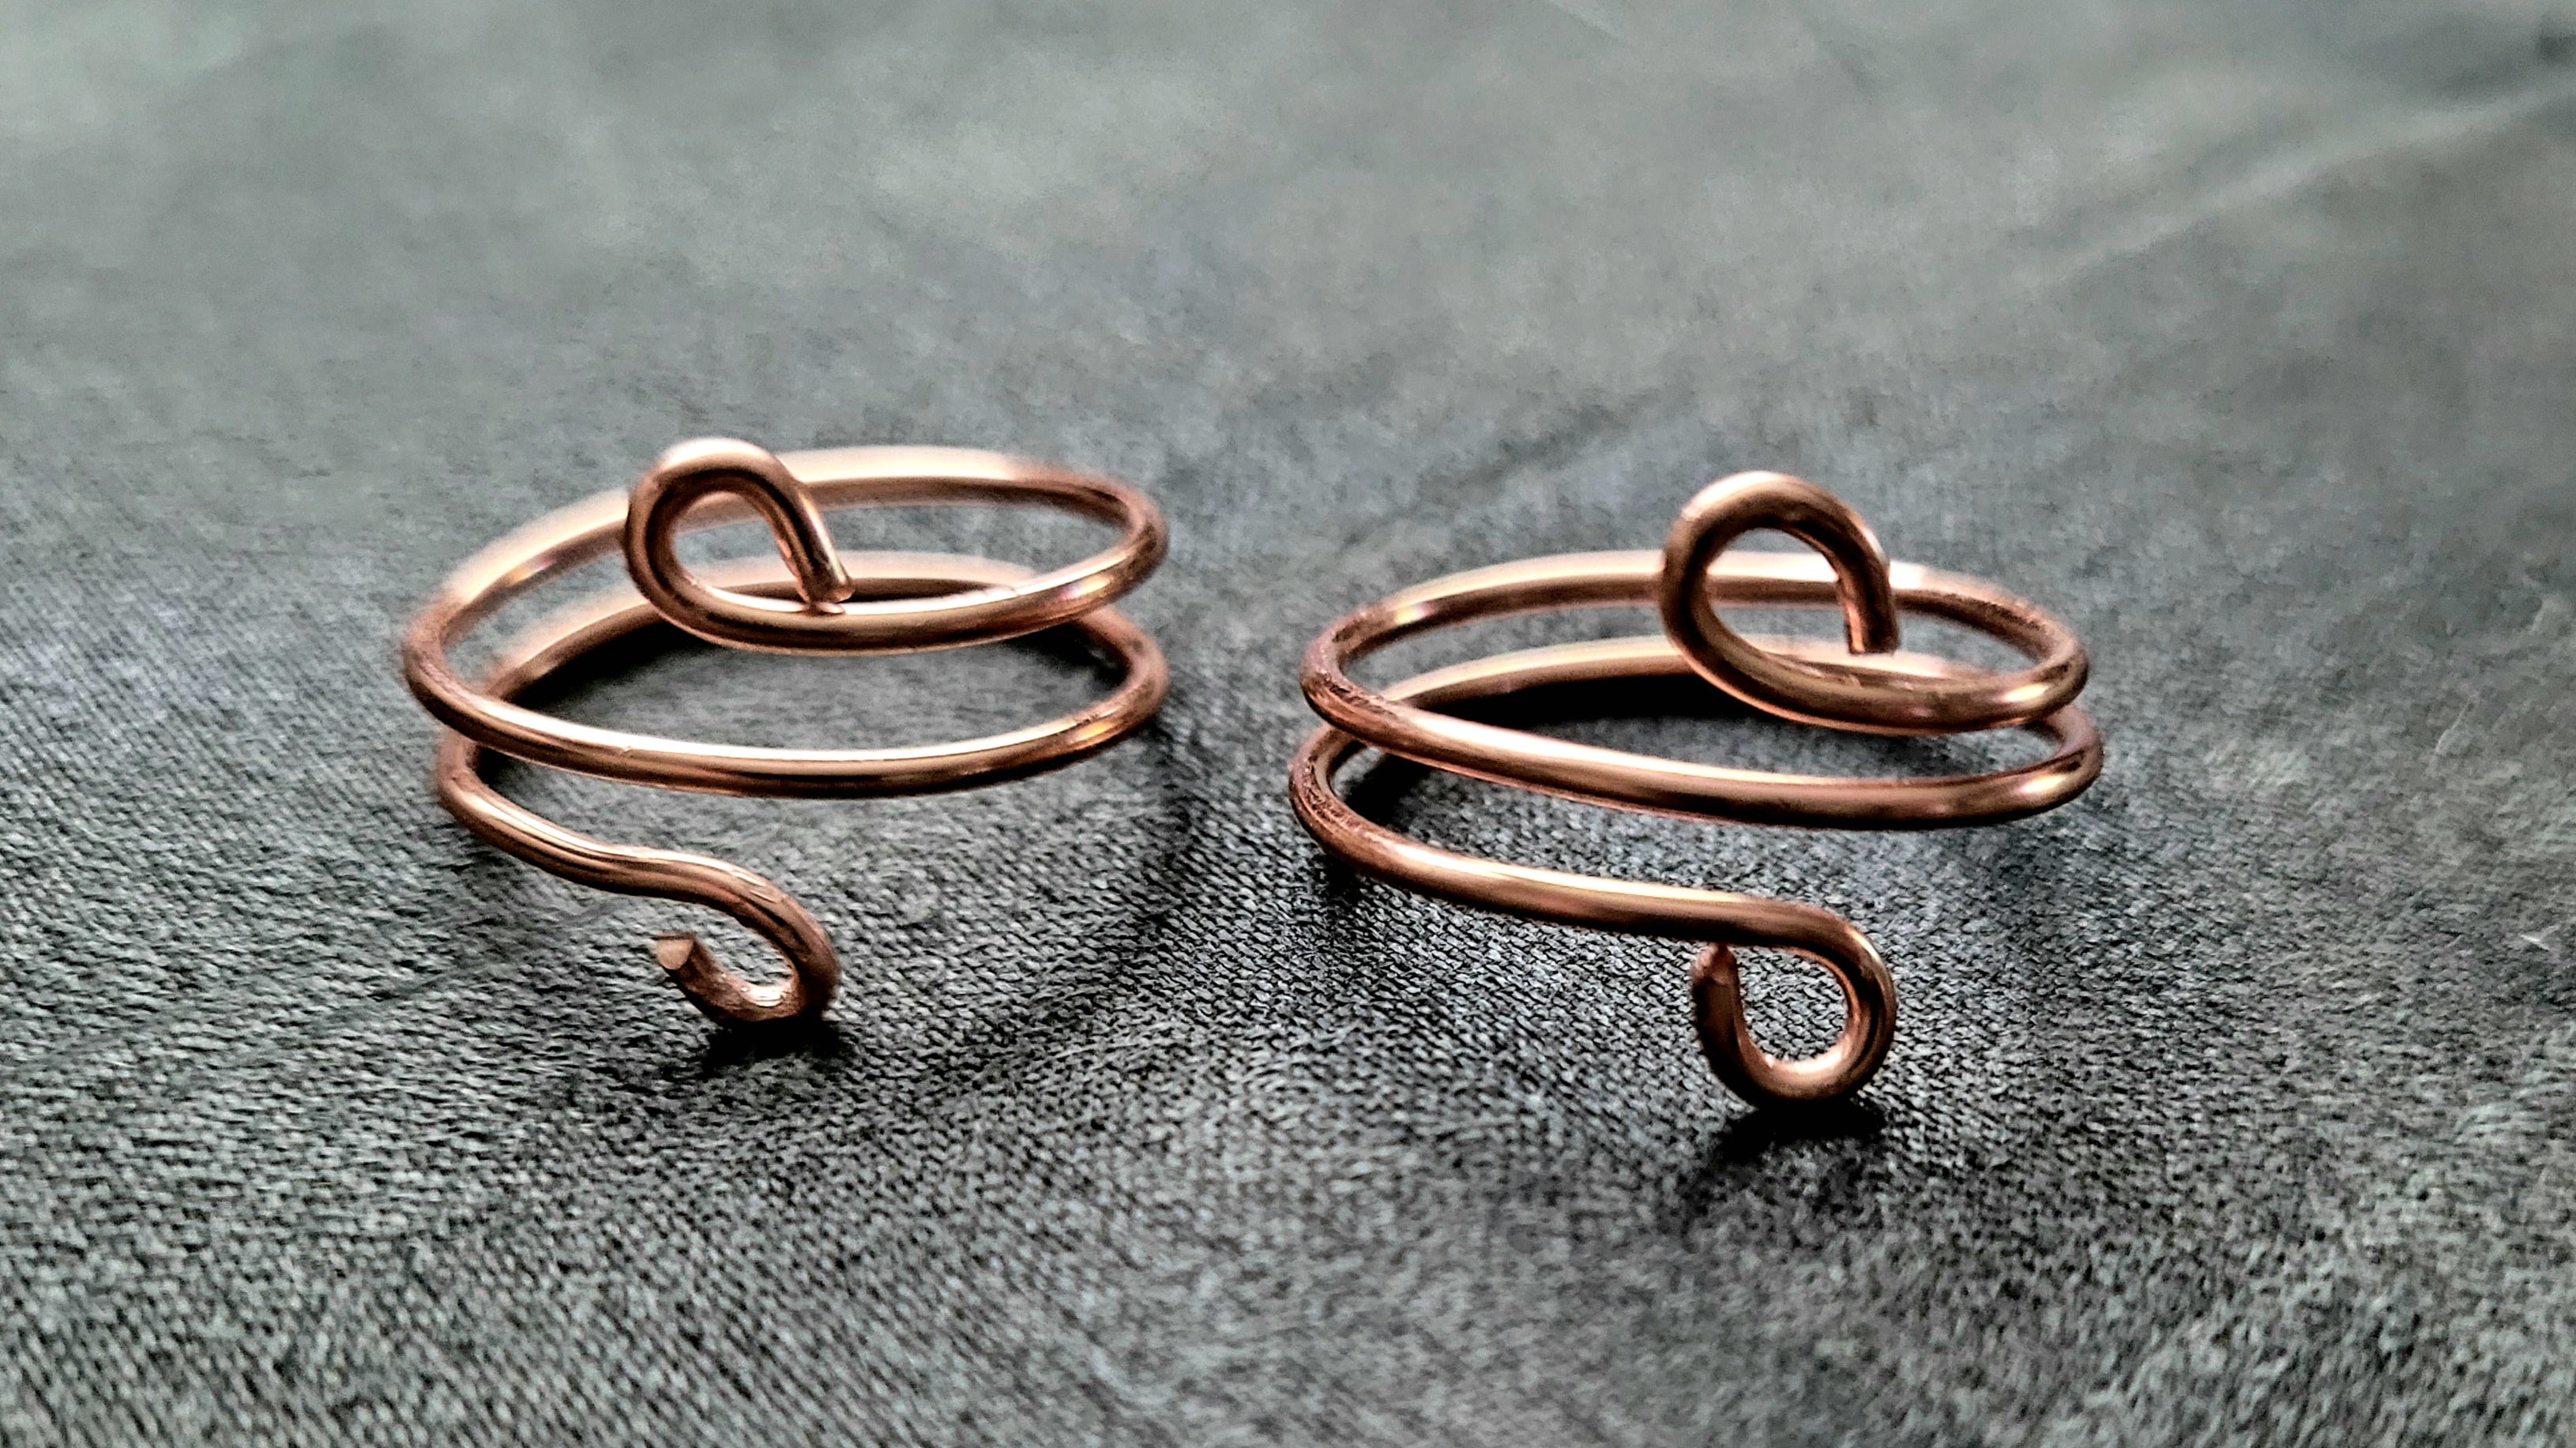 3 Hand Forged Copper Rings Set. 100% Pure Raw Copper Healing Medicine Ring.  | eBay